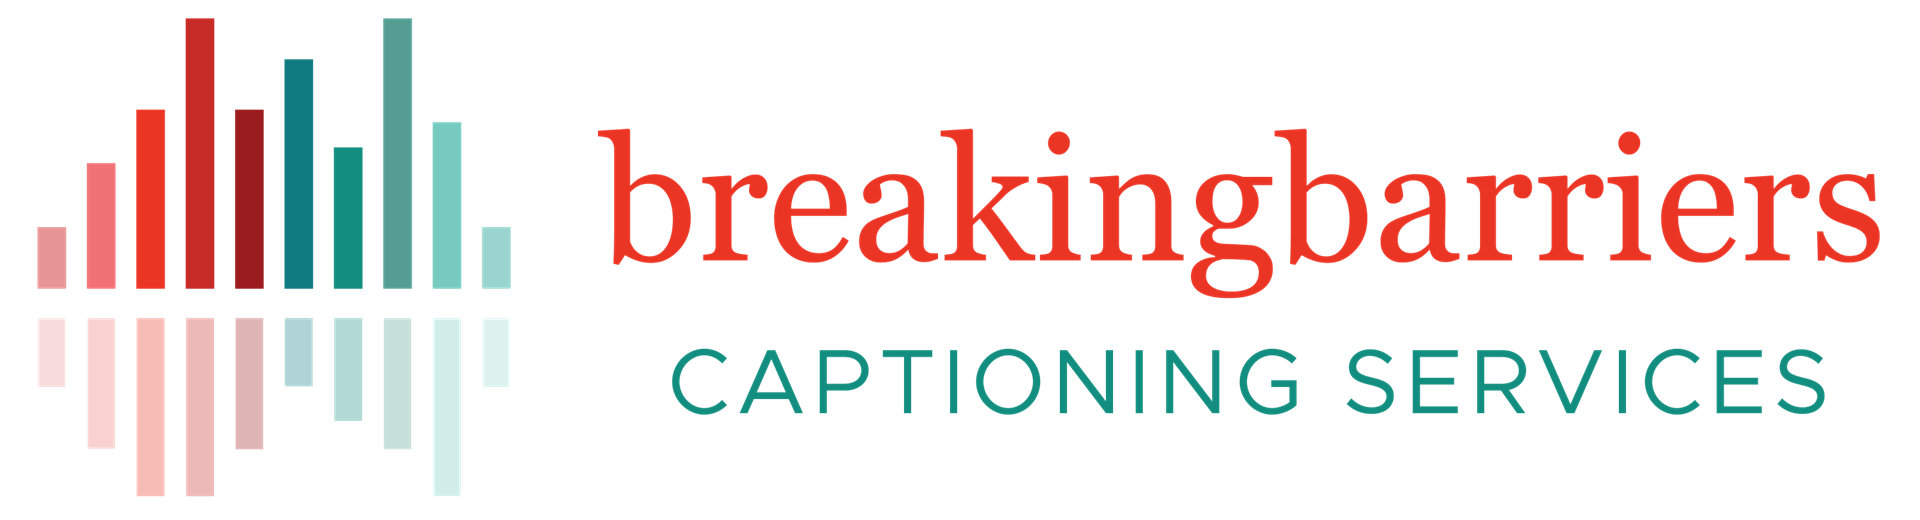 Breaking Barriers Captioning Services logo